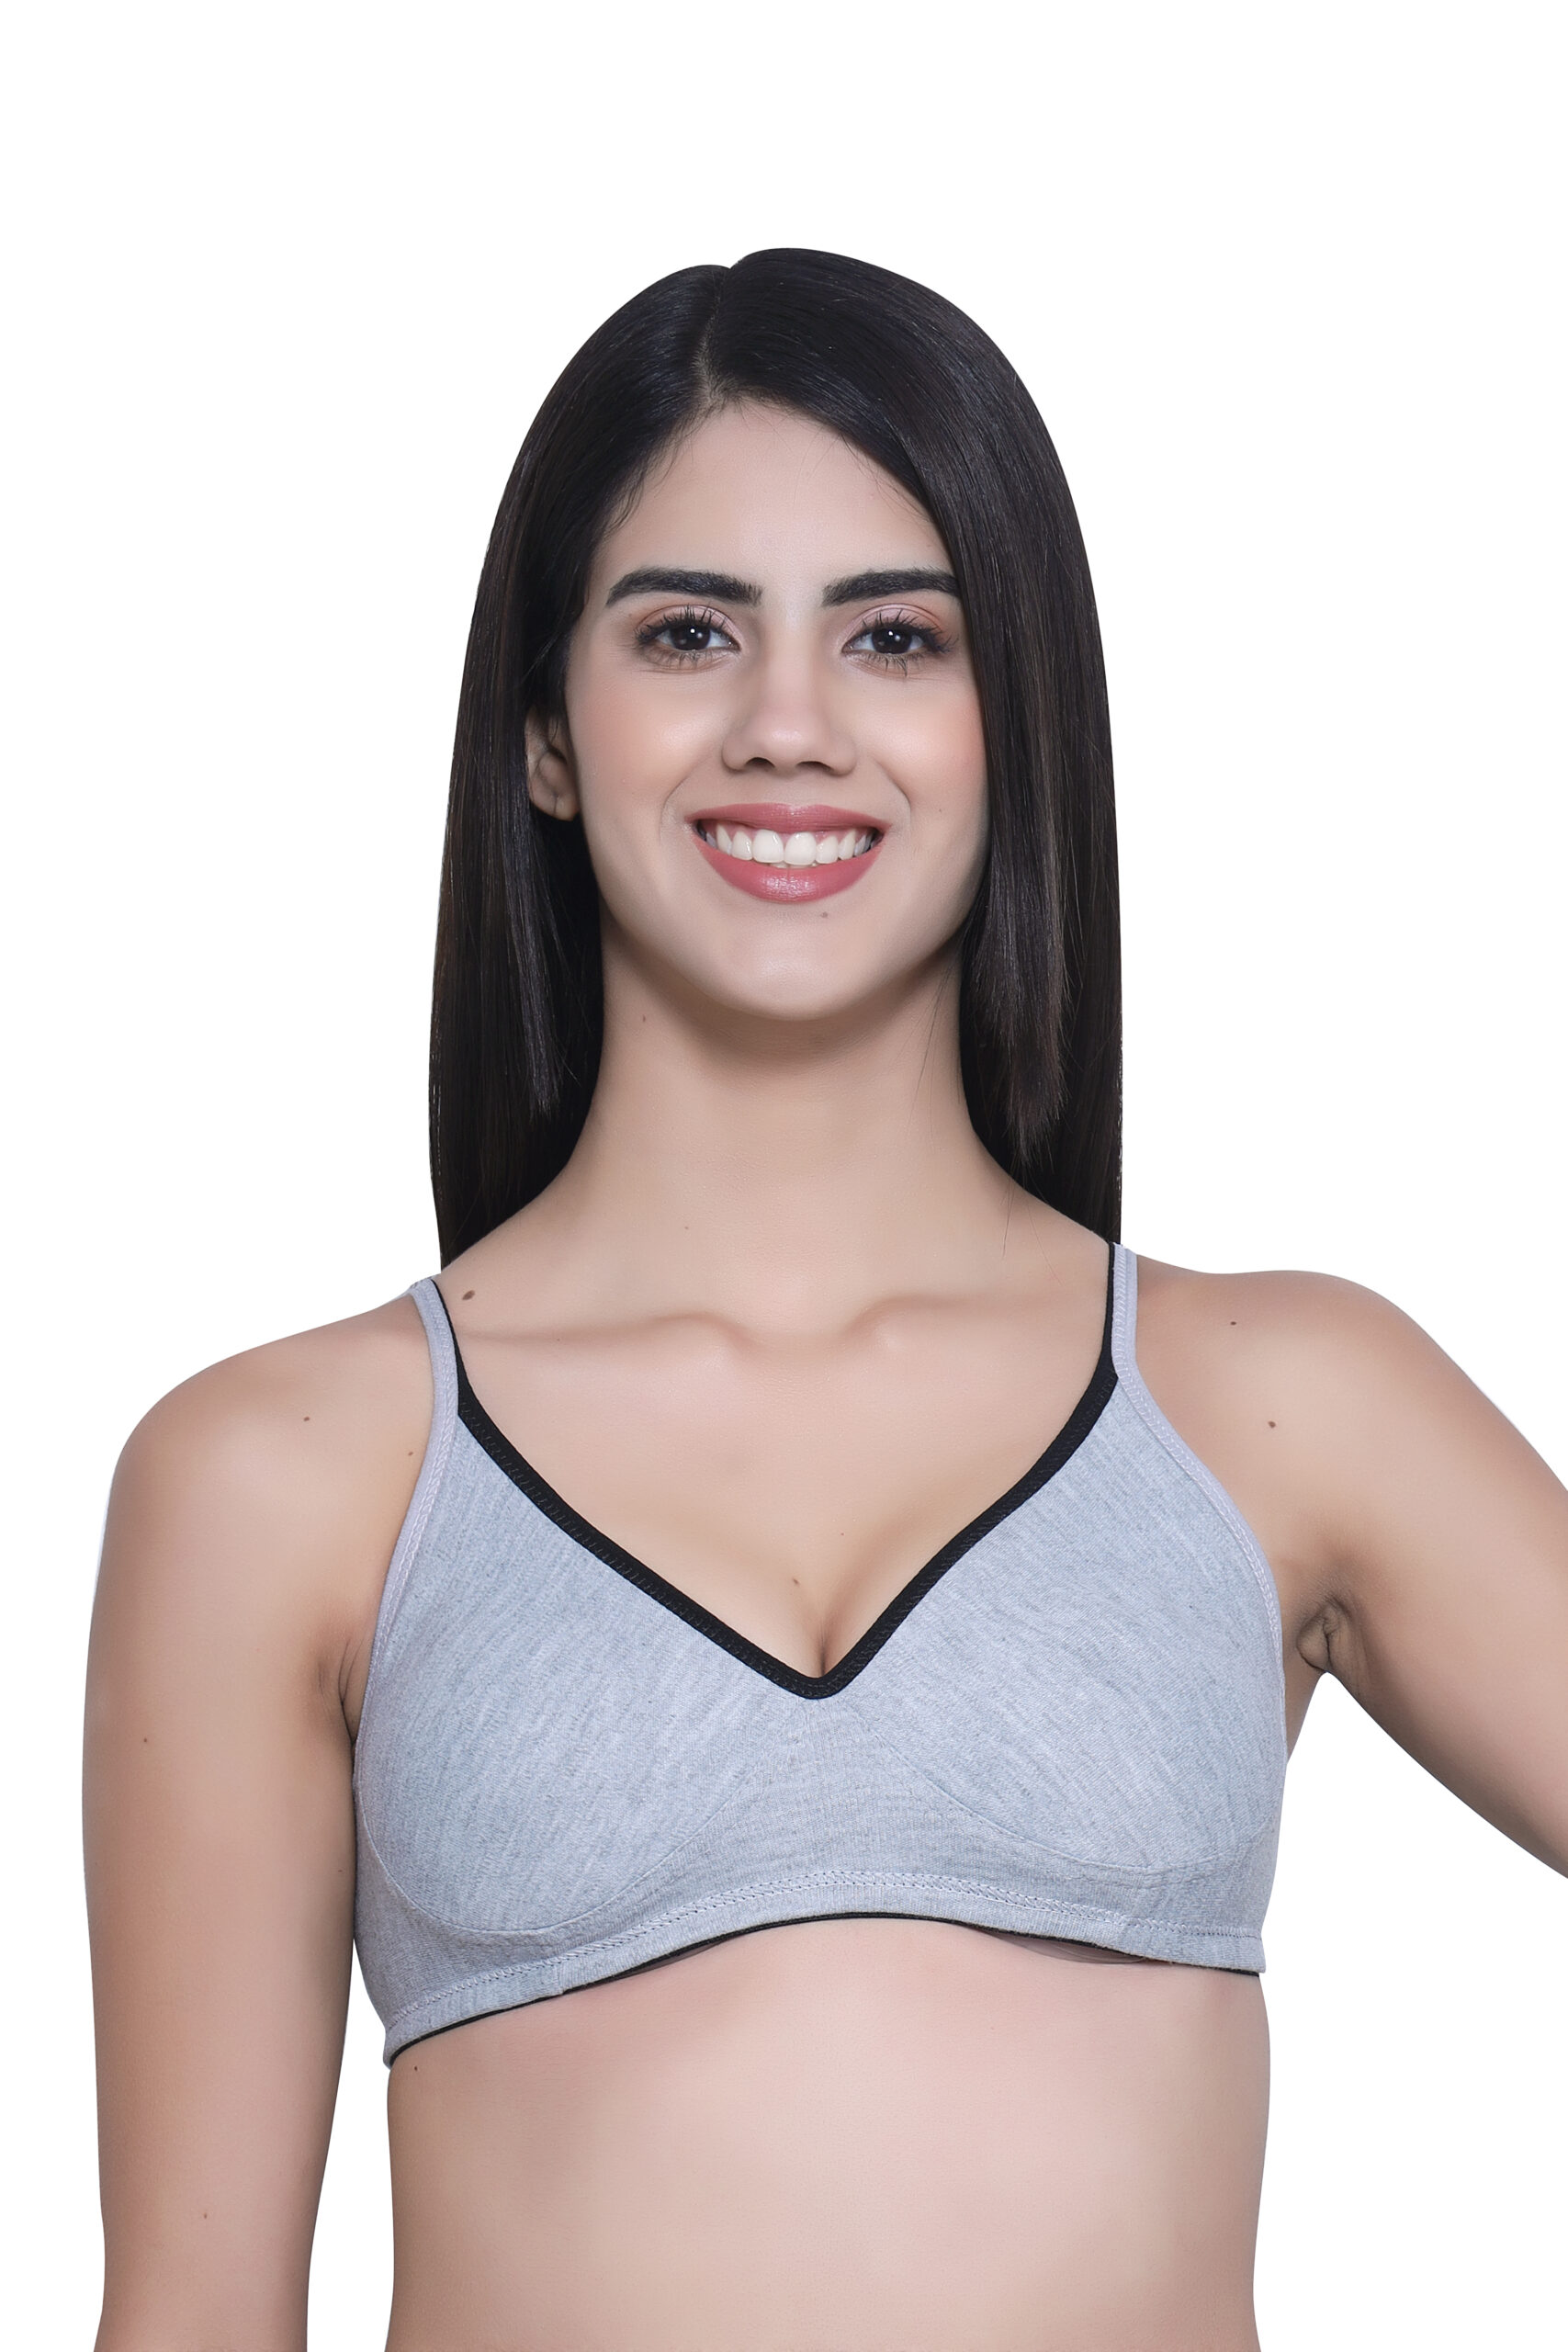 Get Premium Quality Sports Bra Only ₹ 199-/ Shipping Free !! - Manufacturer  and Exporter of women Wear